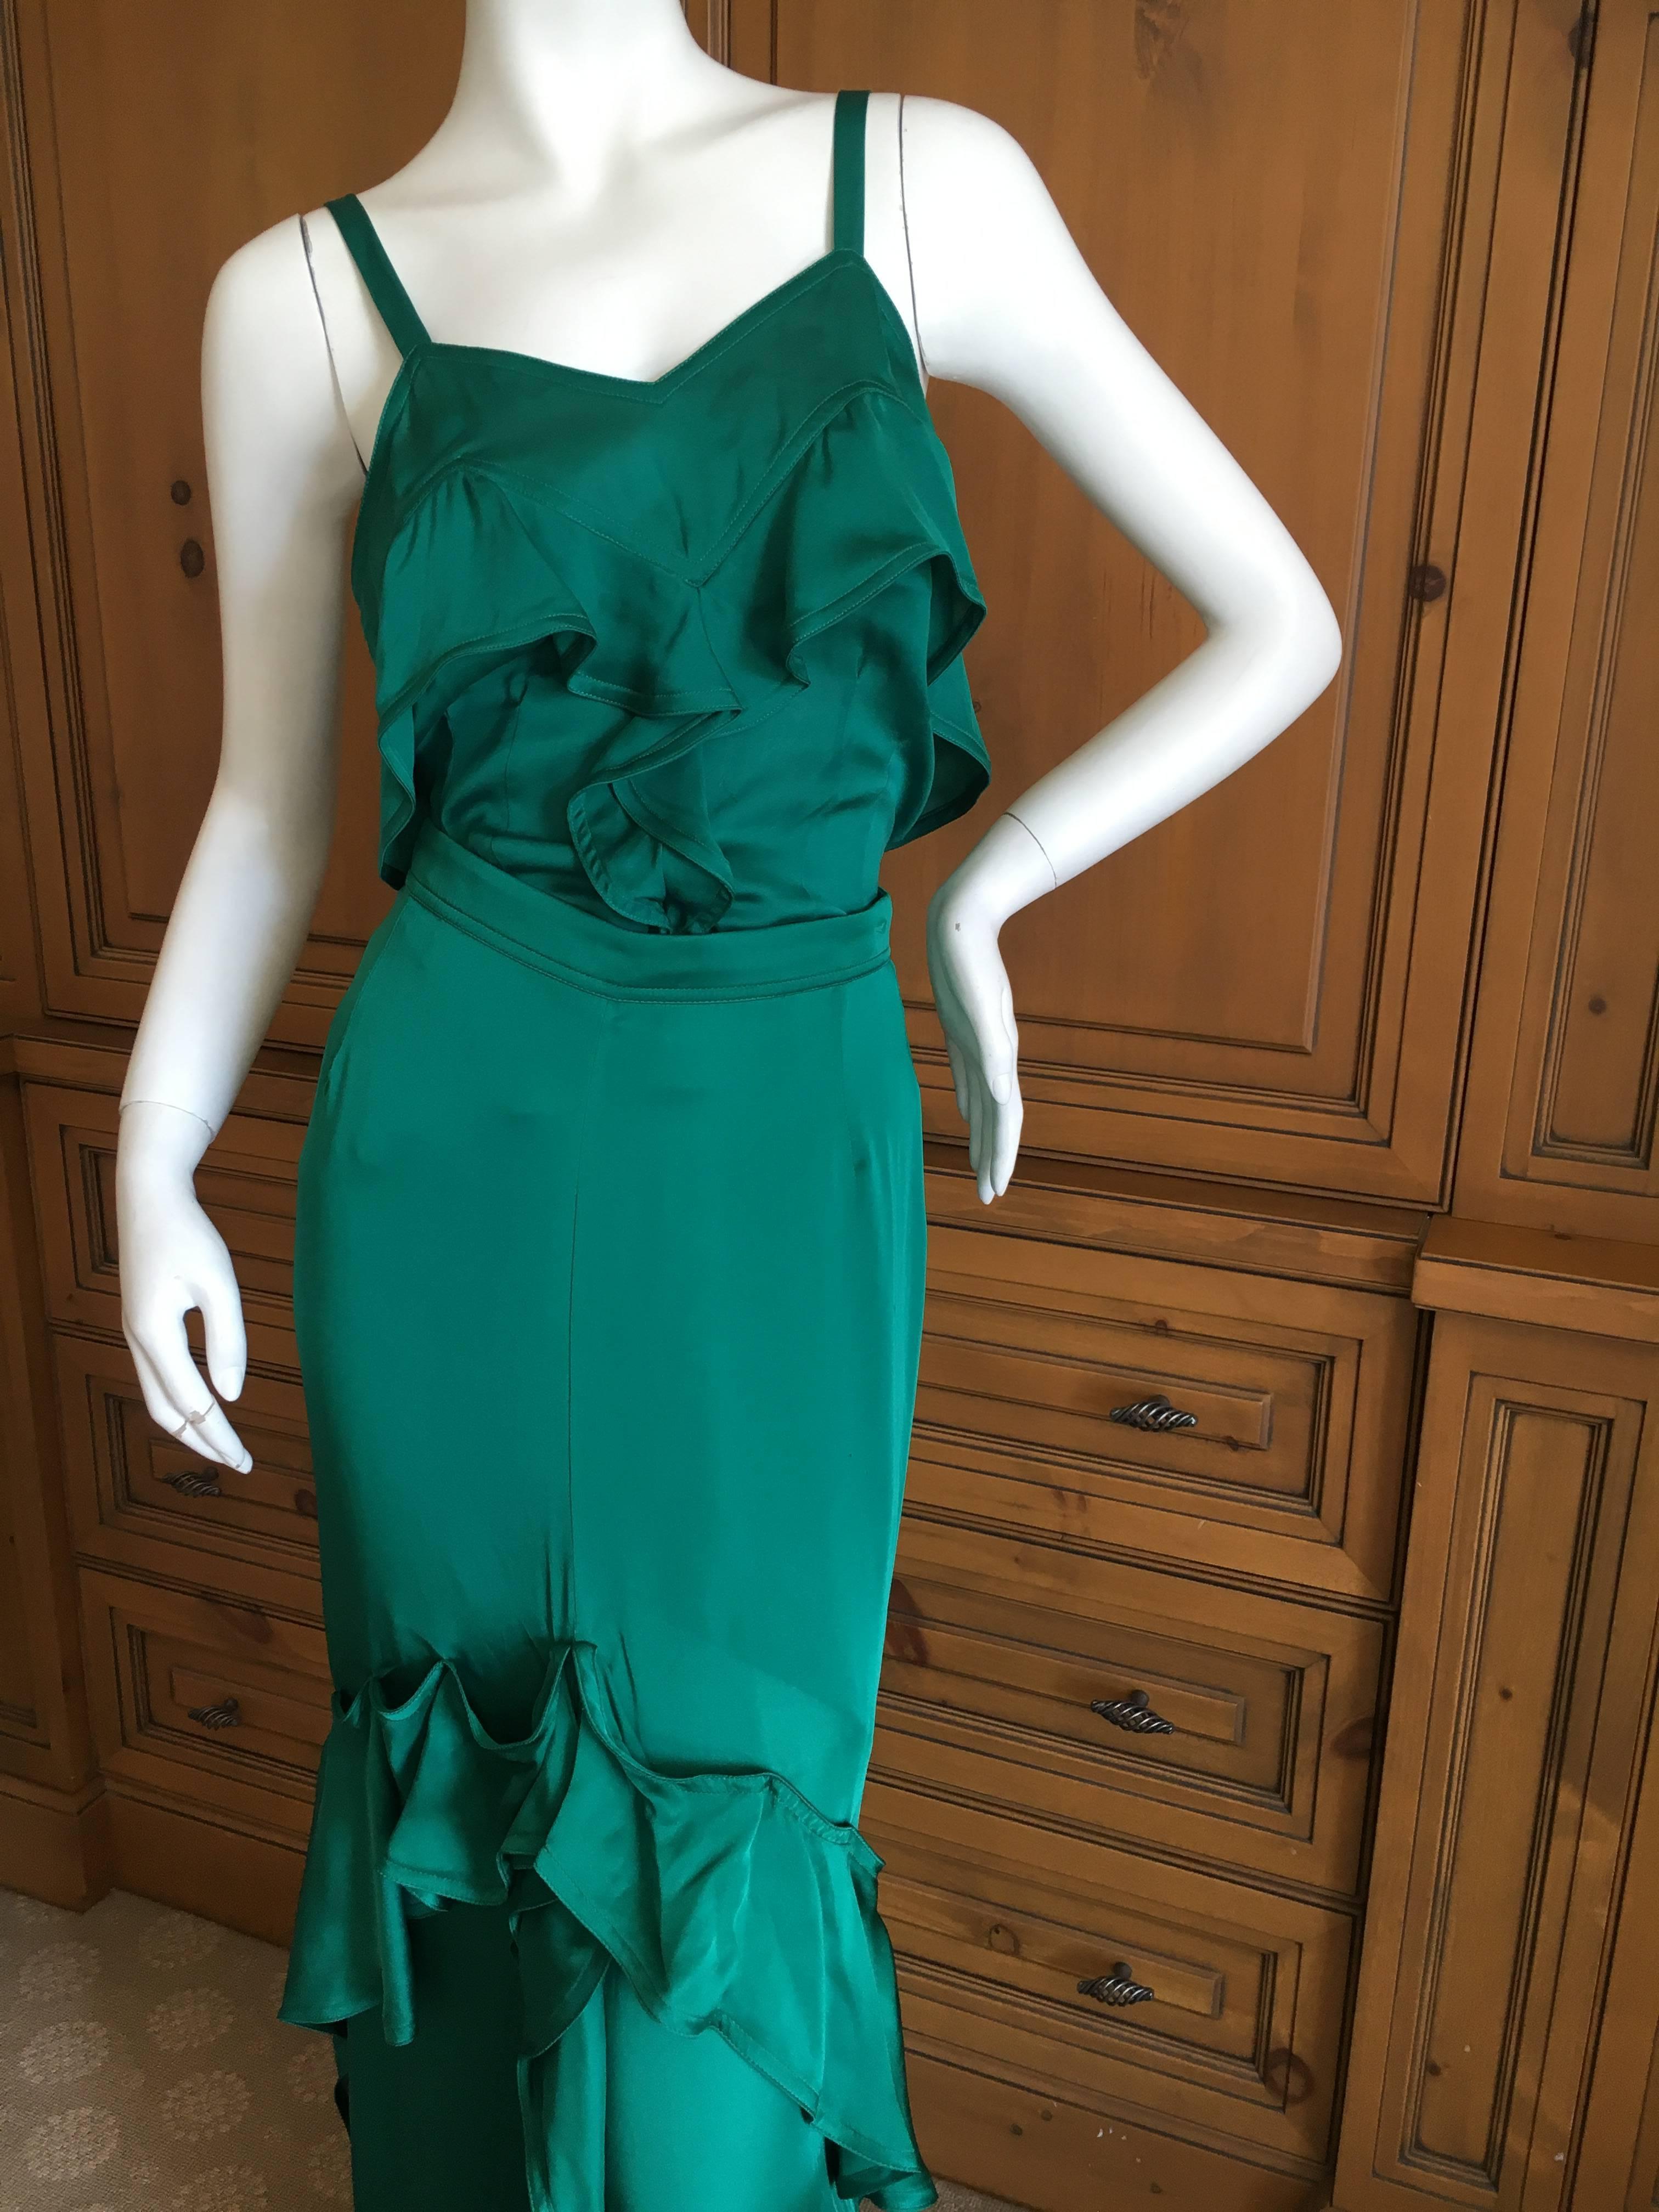 Yves Saint Laurent by Tom Ford Two Piece Ruffled Dress.
2003 green silk dress in two pieces from Tom Ford for YSL.
This is new with tags, originally $3390.
Size 8
Top;
Bust 38"
Waist 31"
Length 25"
Skirt
Waist 30"
Hips